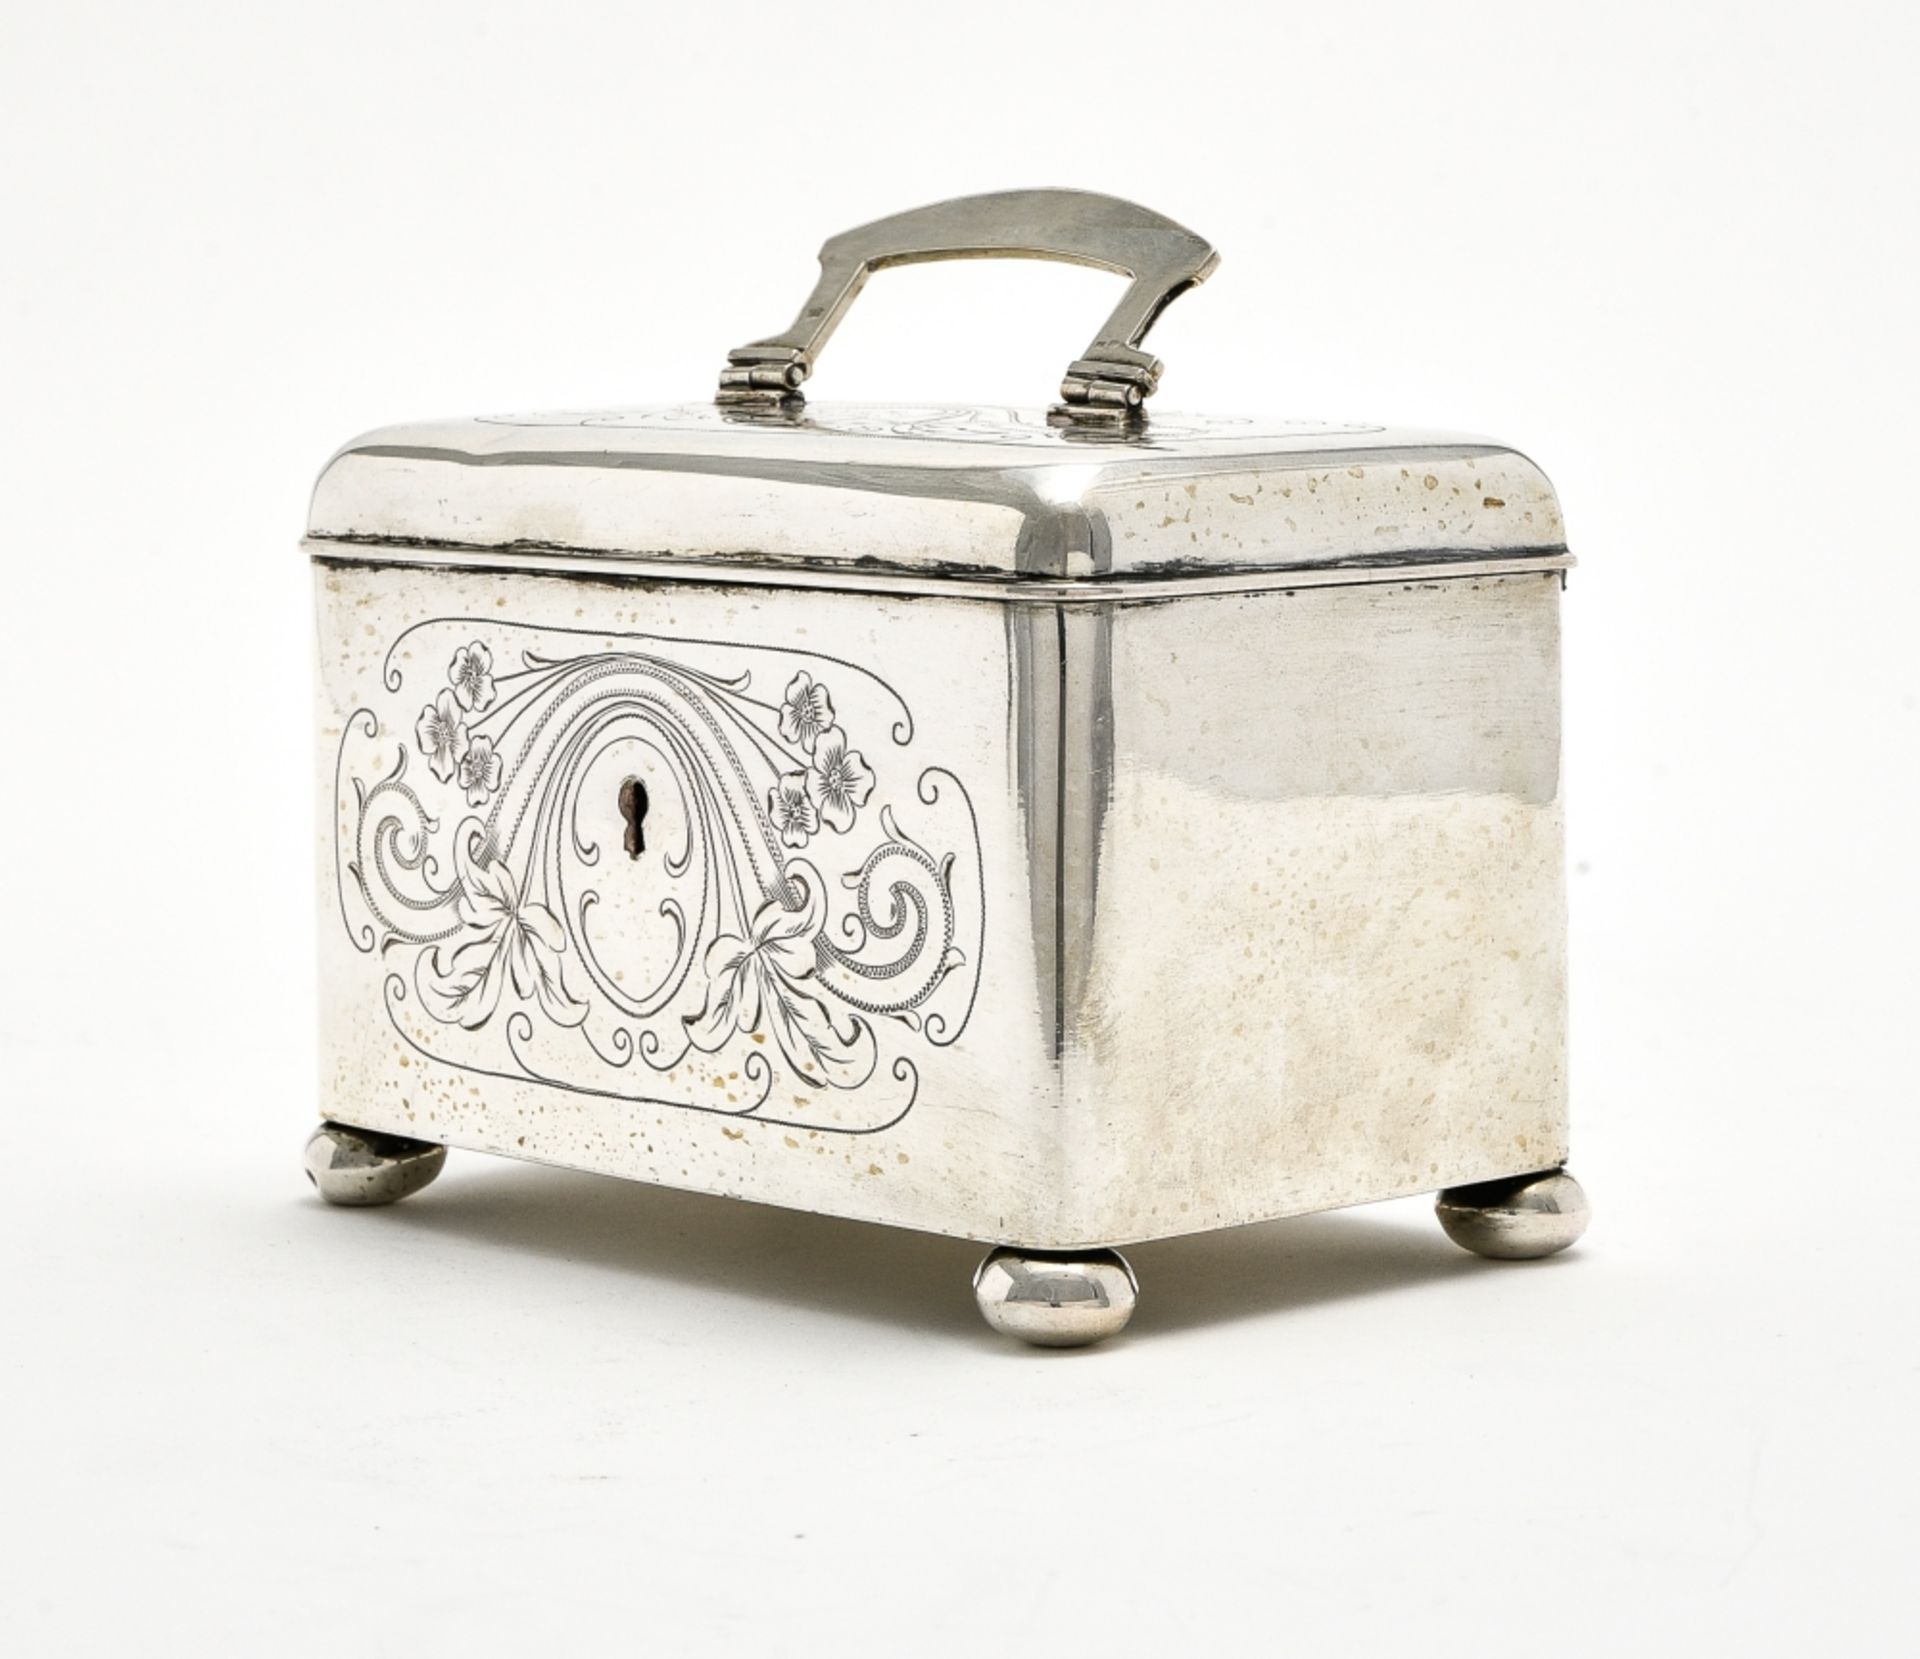 Box AUSTRIA-HUNGARY, LATE 19TH CENTURY 800 silver, engraved floral dŽcor and initials AB. - Image 5 of 5